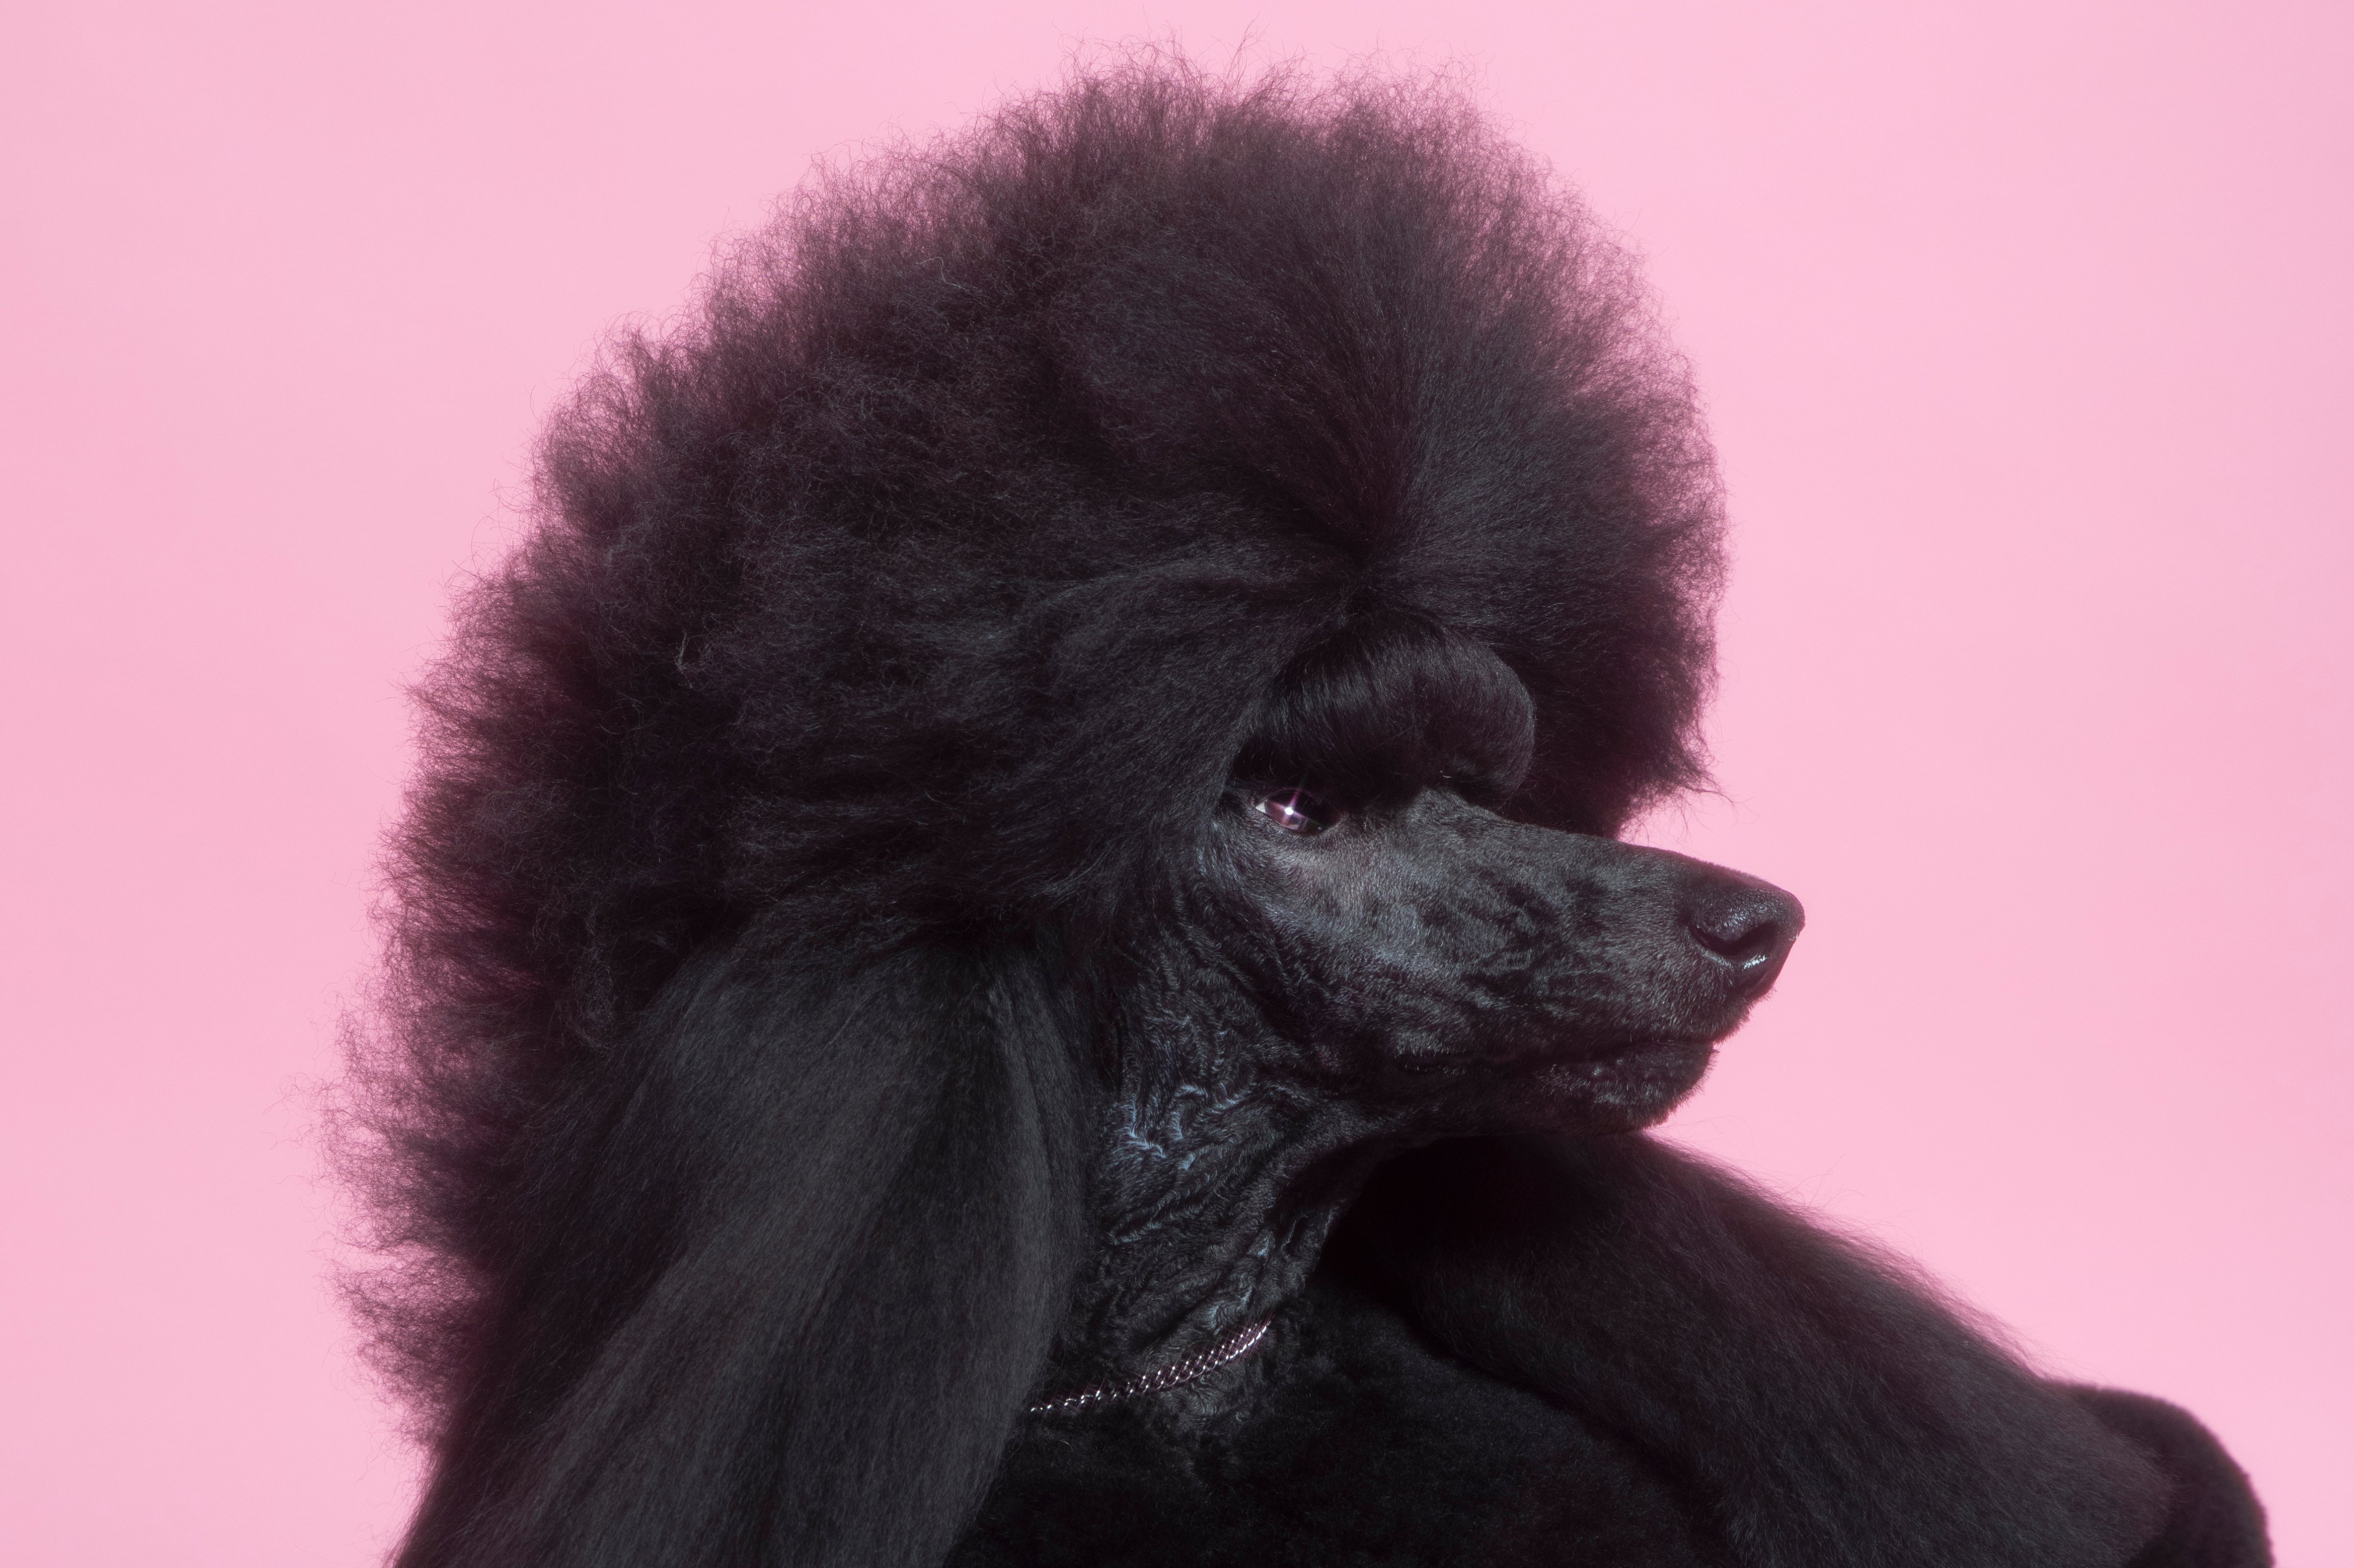 Siba the Standard Poodle, who won the 2020 Westminster Dog Show, poses for a portrait at the TIME studio on Feb. 12 (Sangsuk Sylvia Kang for TIME)